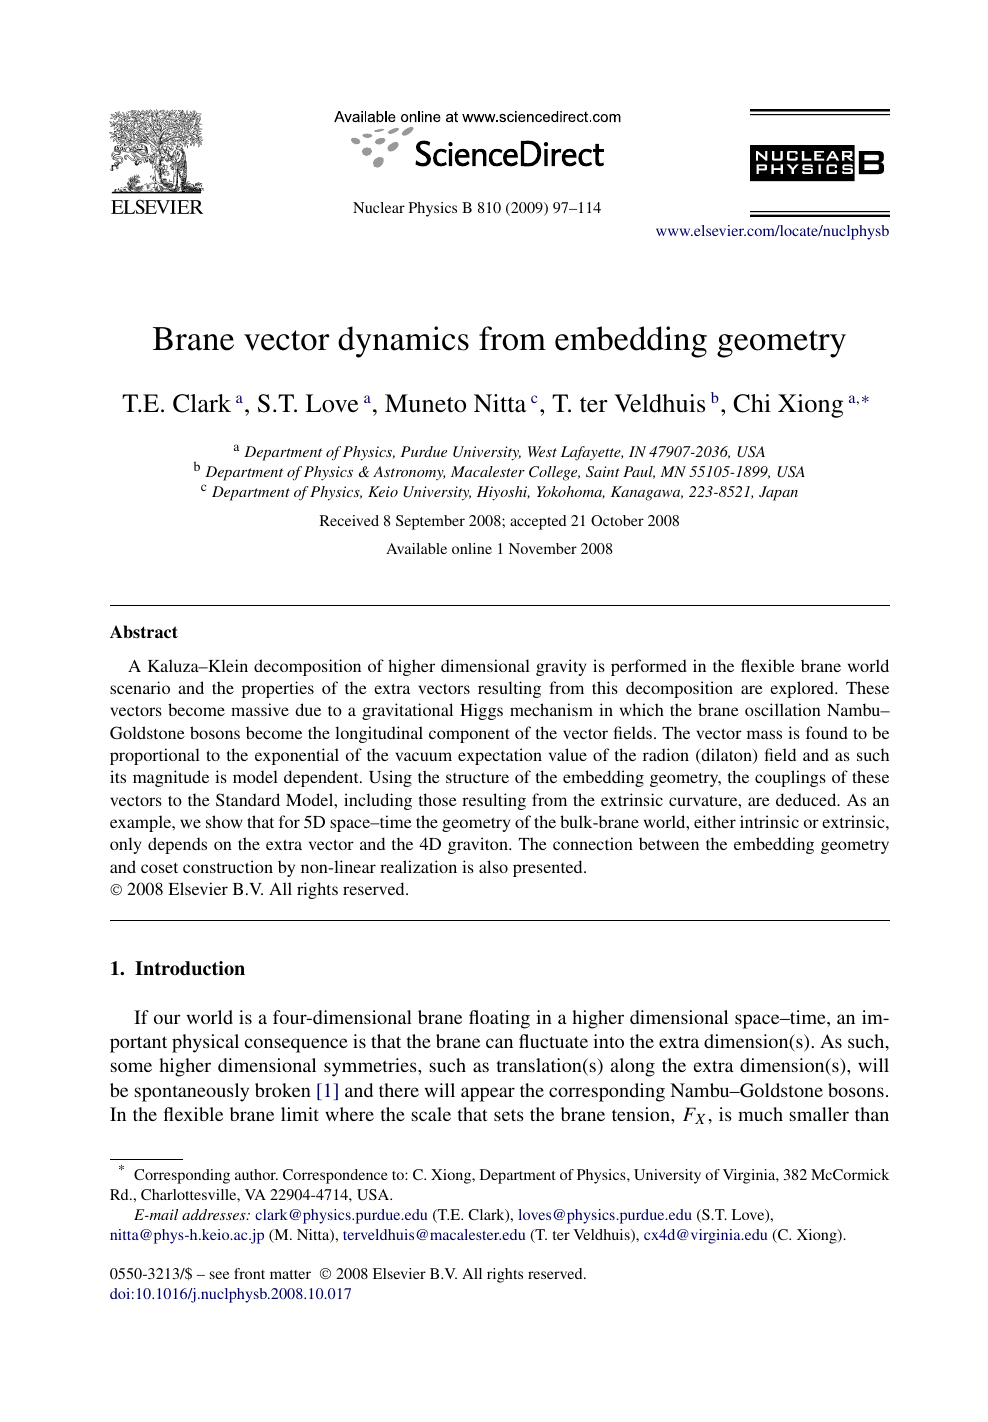 Brane Vector Dynamics From Embedding Geometry Topic Of Research Paper In Physical Sciences Download Scholarly Article Pdf And Read For Free On Cyberleninka Open Science Hub